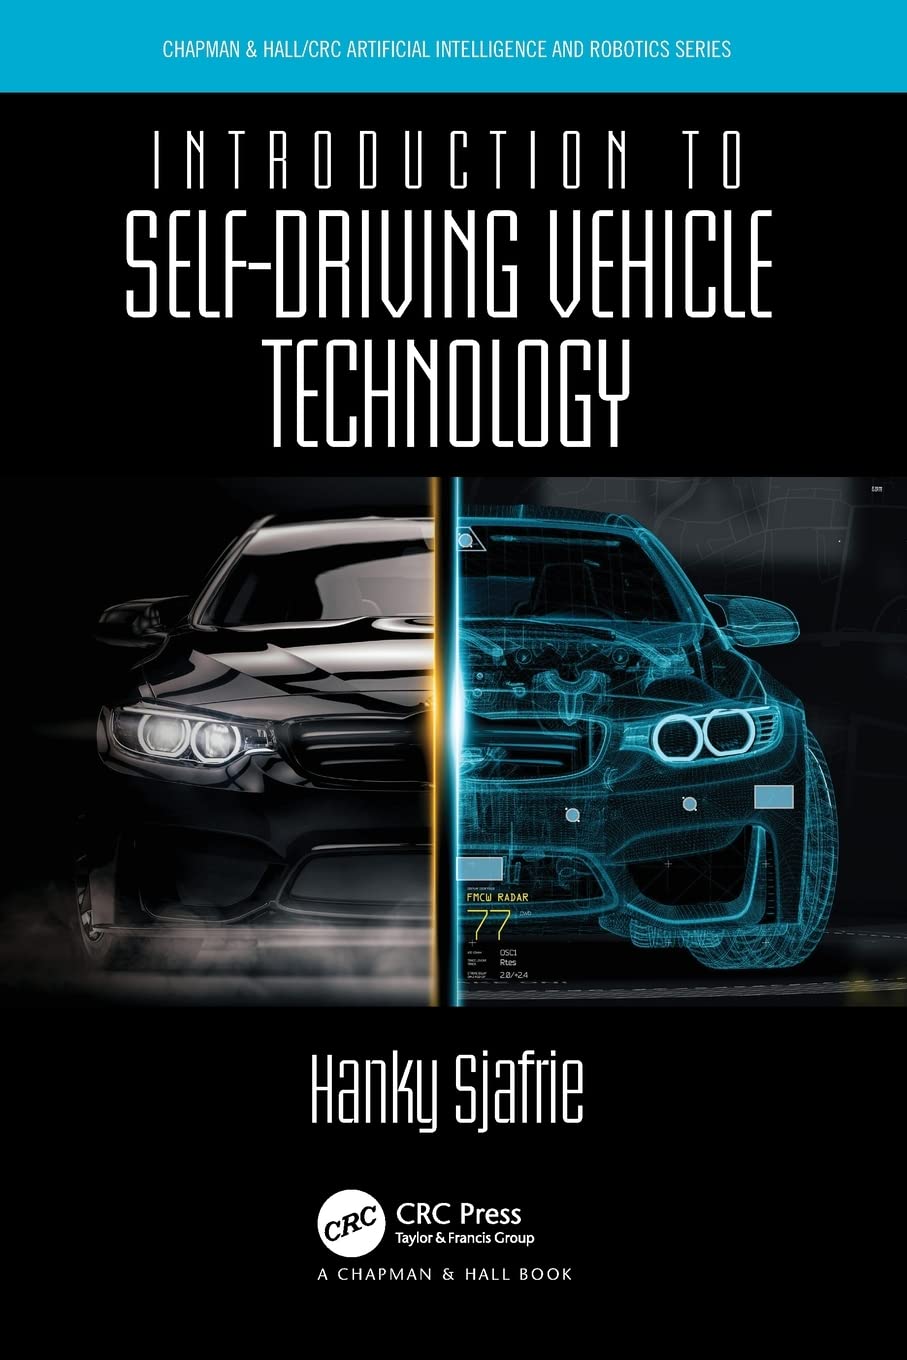 Introduction to Self-Driving Vehicle Technology (Chapman & Hall/CRC Artificial Intelligence and Robotics Series)